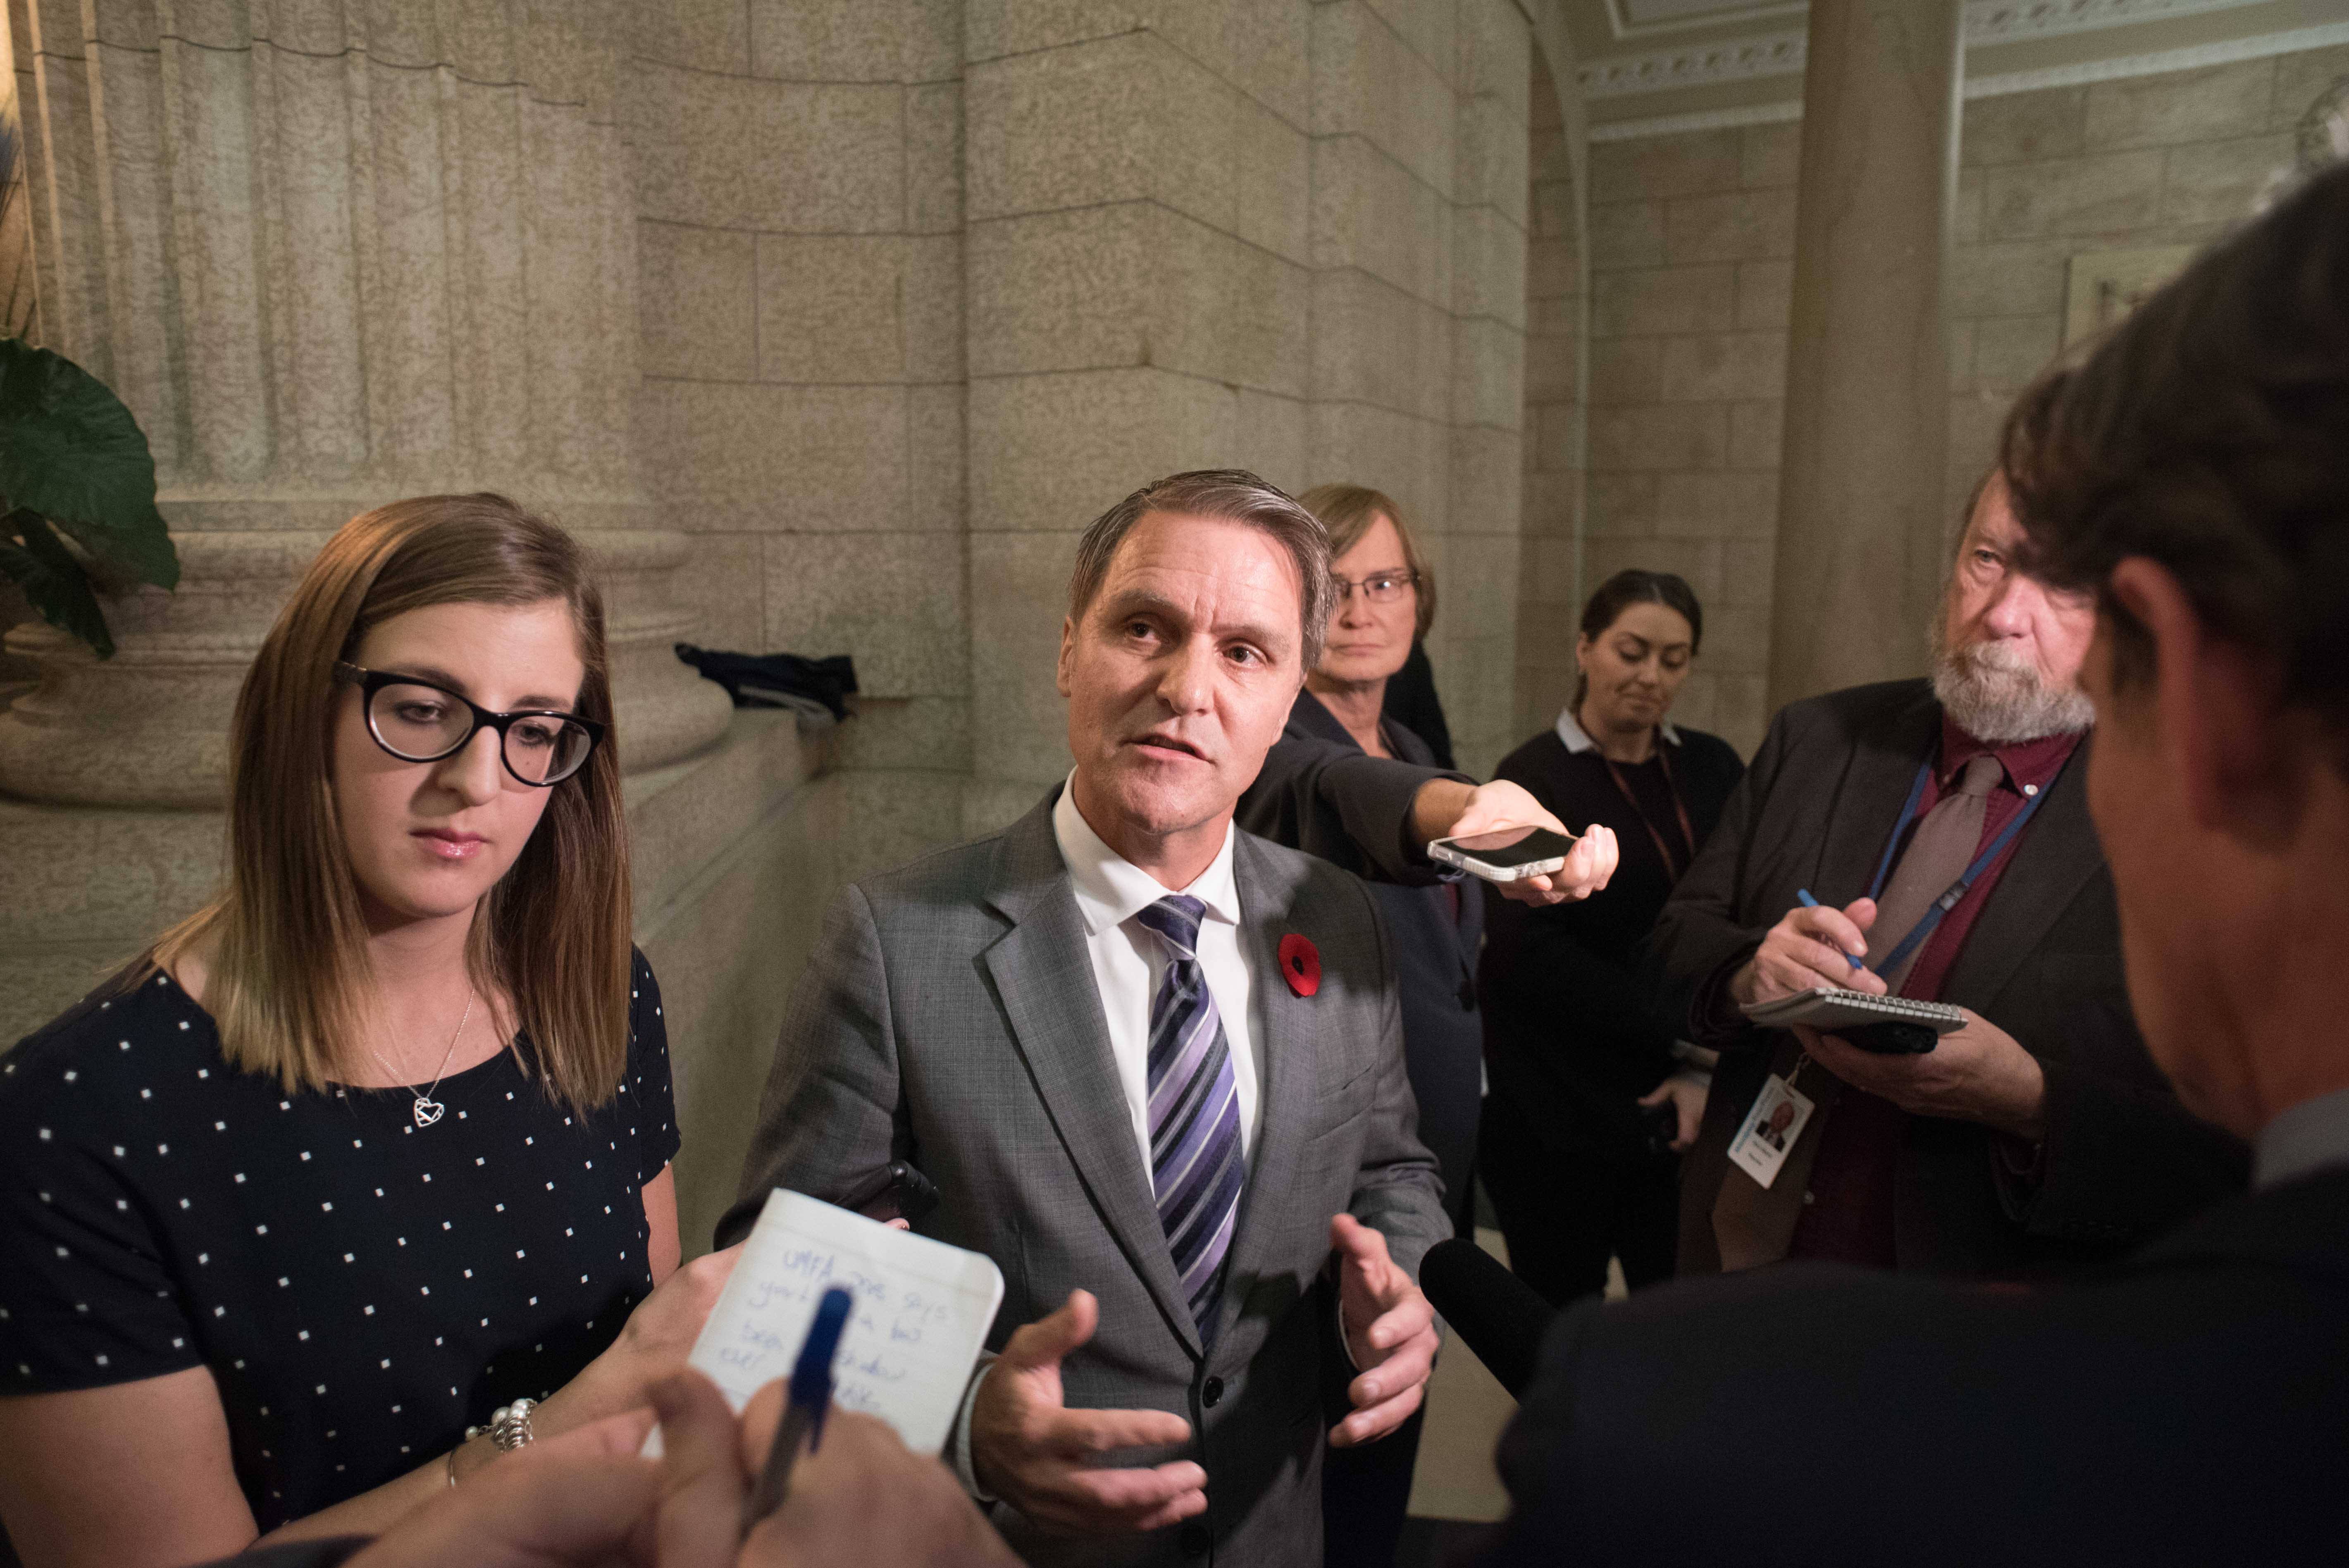 Minister of Finance, Cameron Friesen in press scrum, gives a statement to the Manitoban. Photo by Miguel Yetman